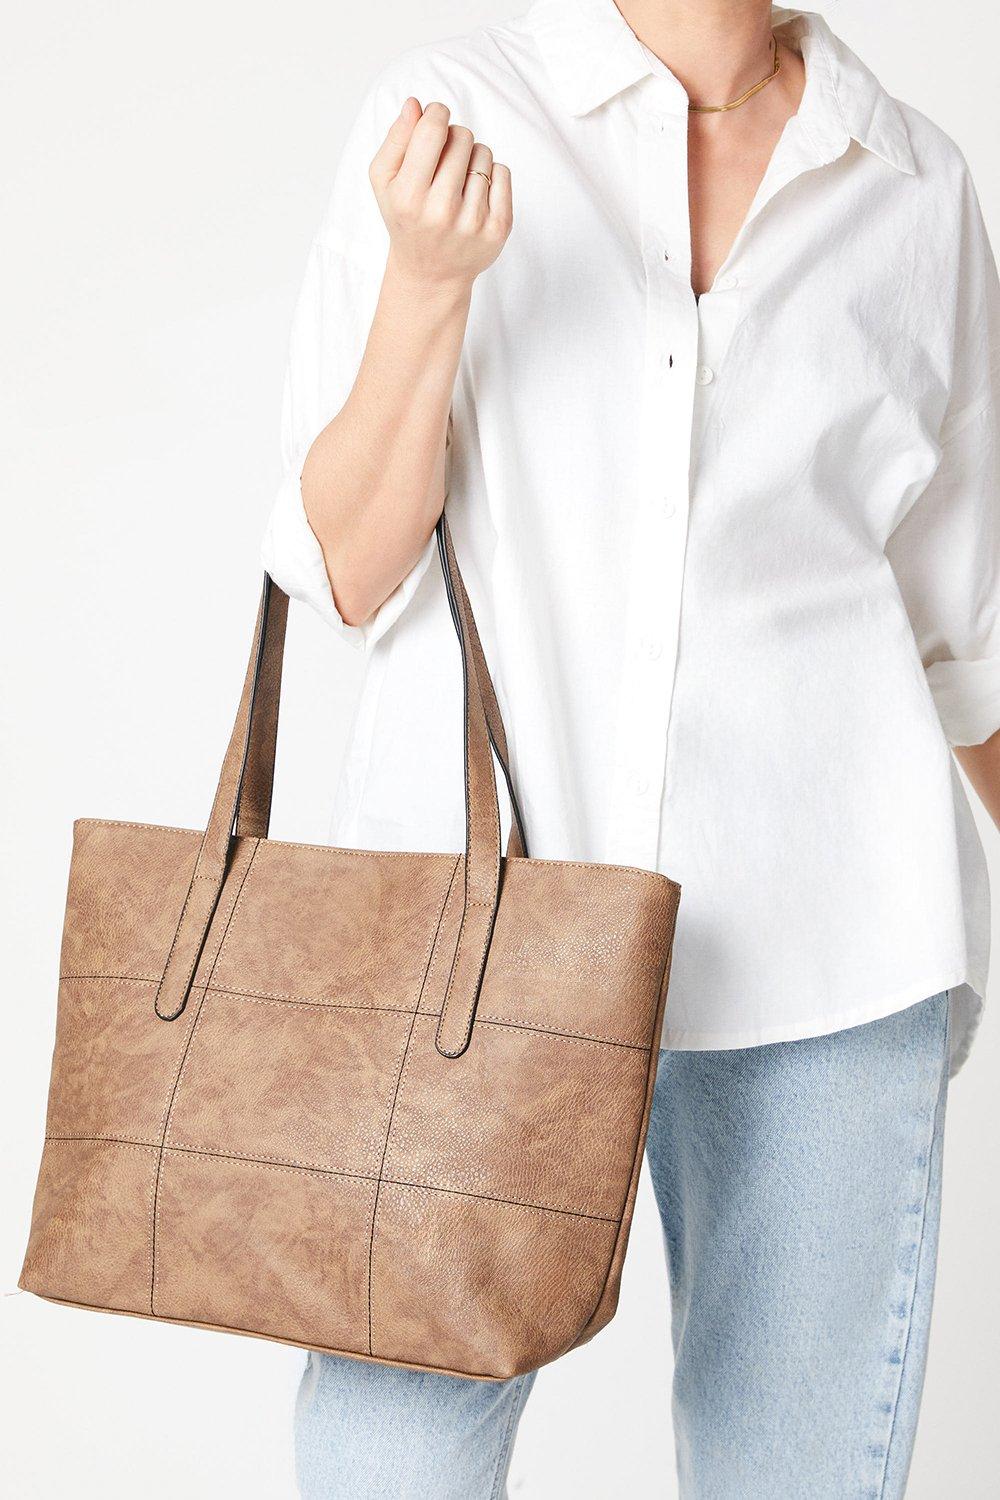 Women’s Trish Stitched Tote Bag - brown - One Size